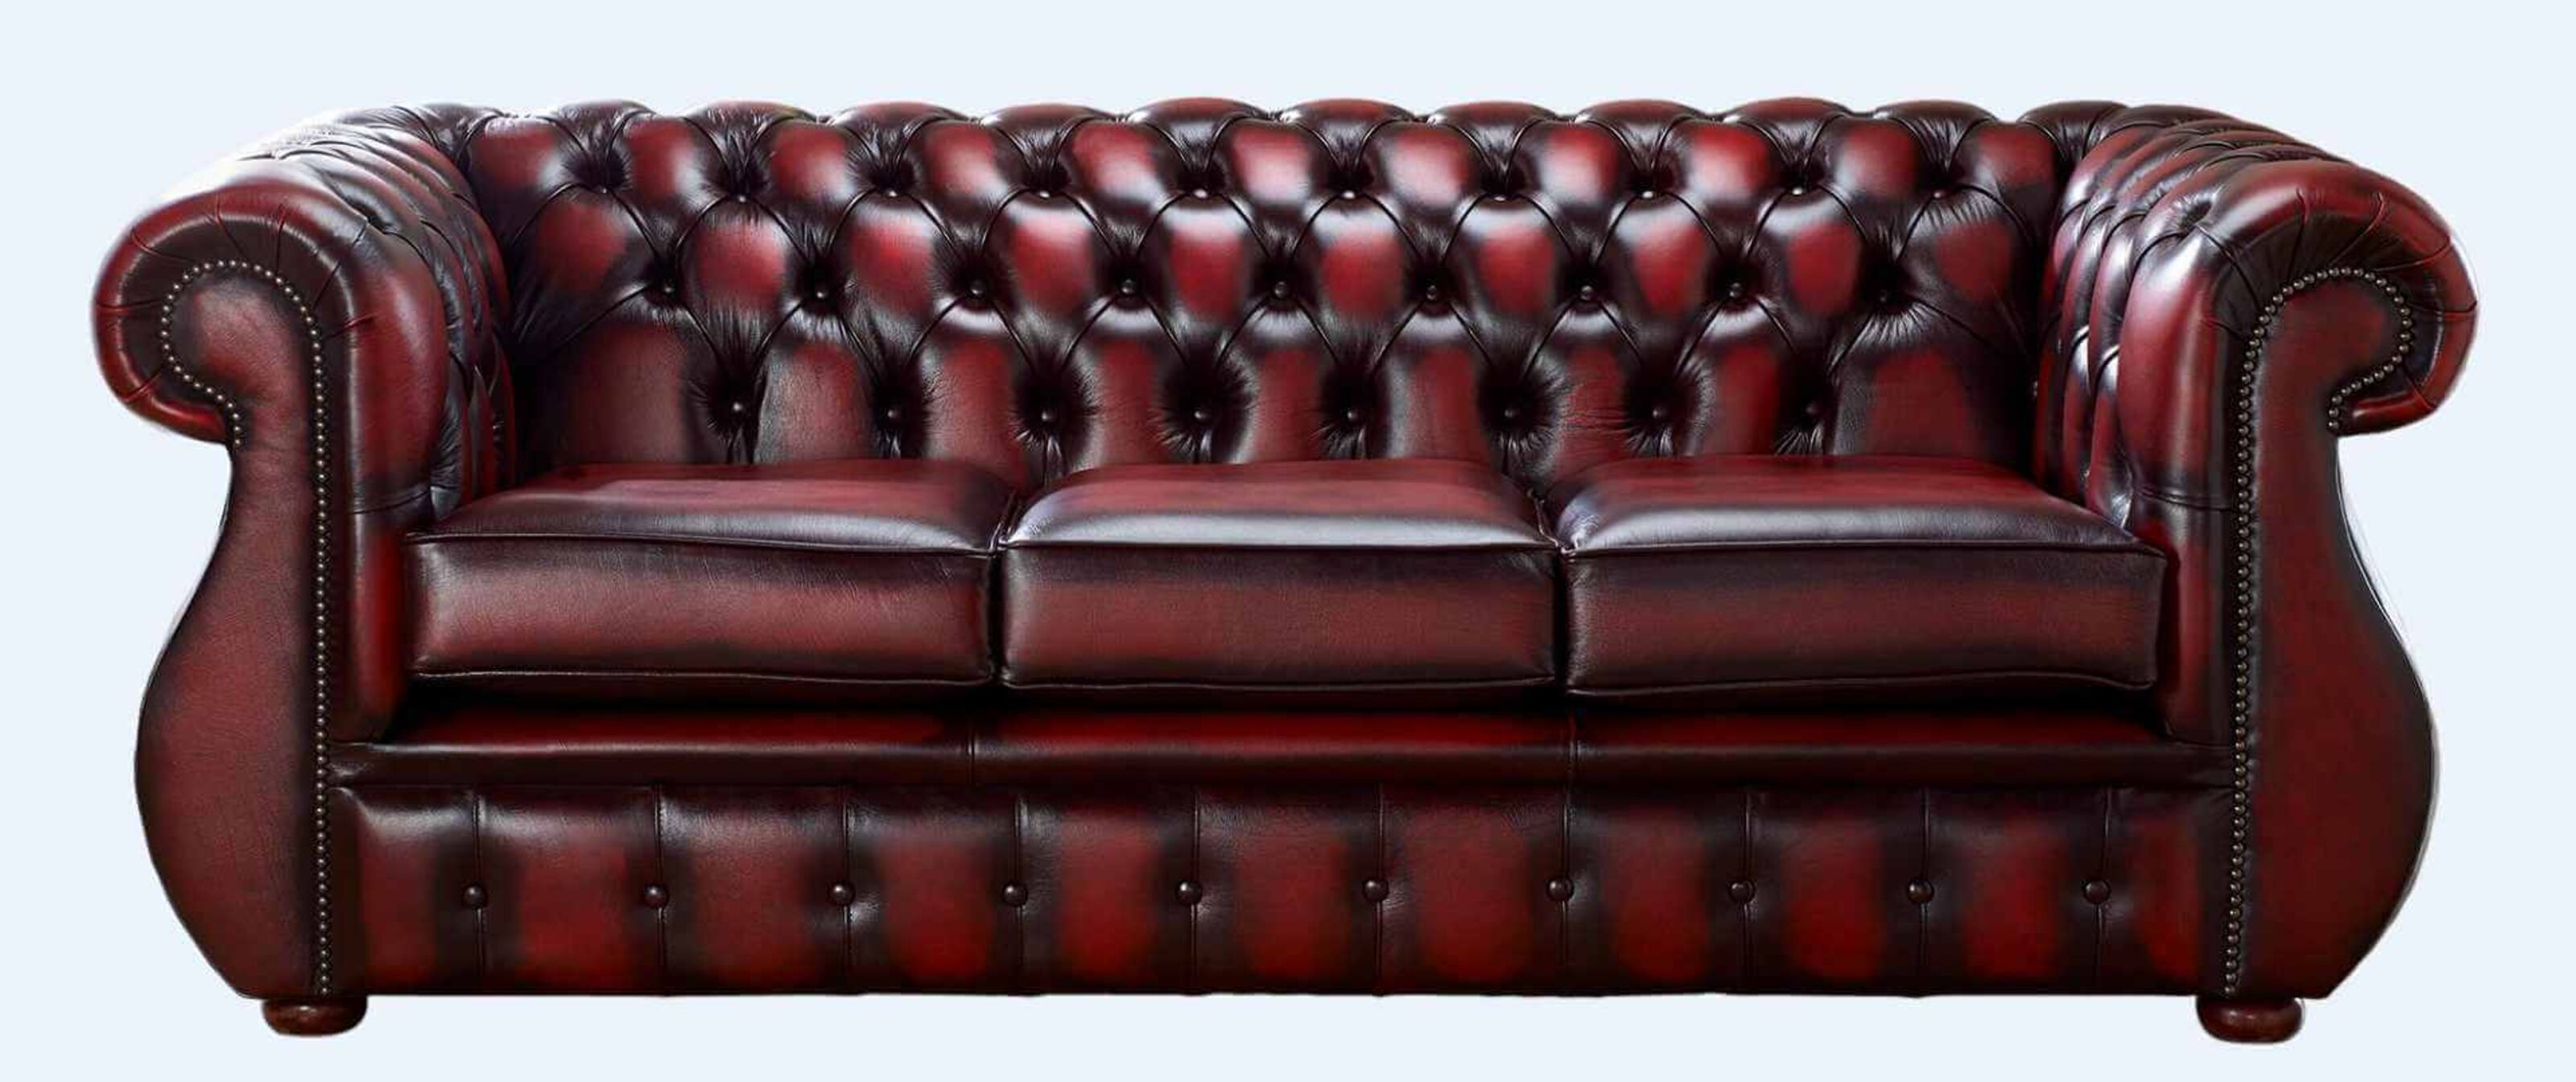 Sturdy Support Exploring Chesterfield Sofa Feet Options  %Post Title